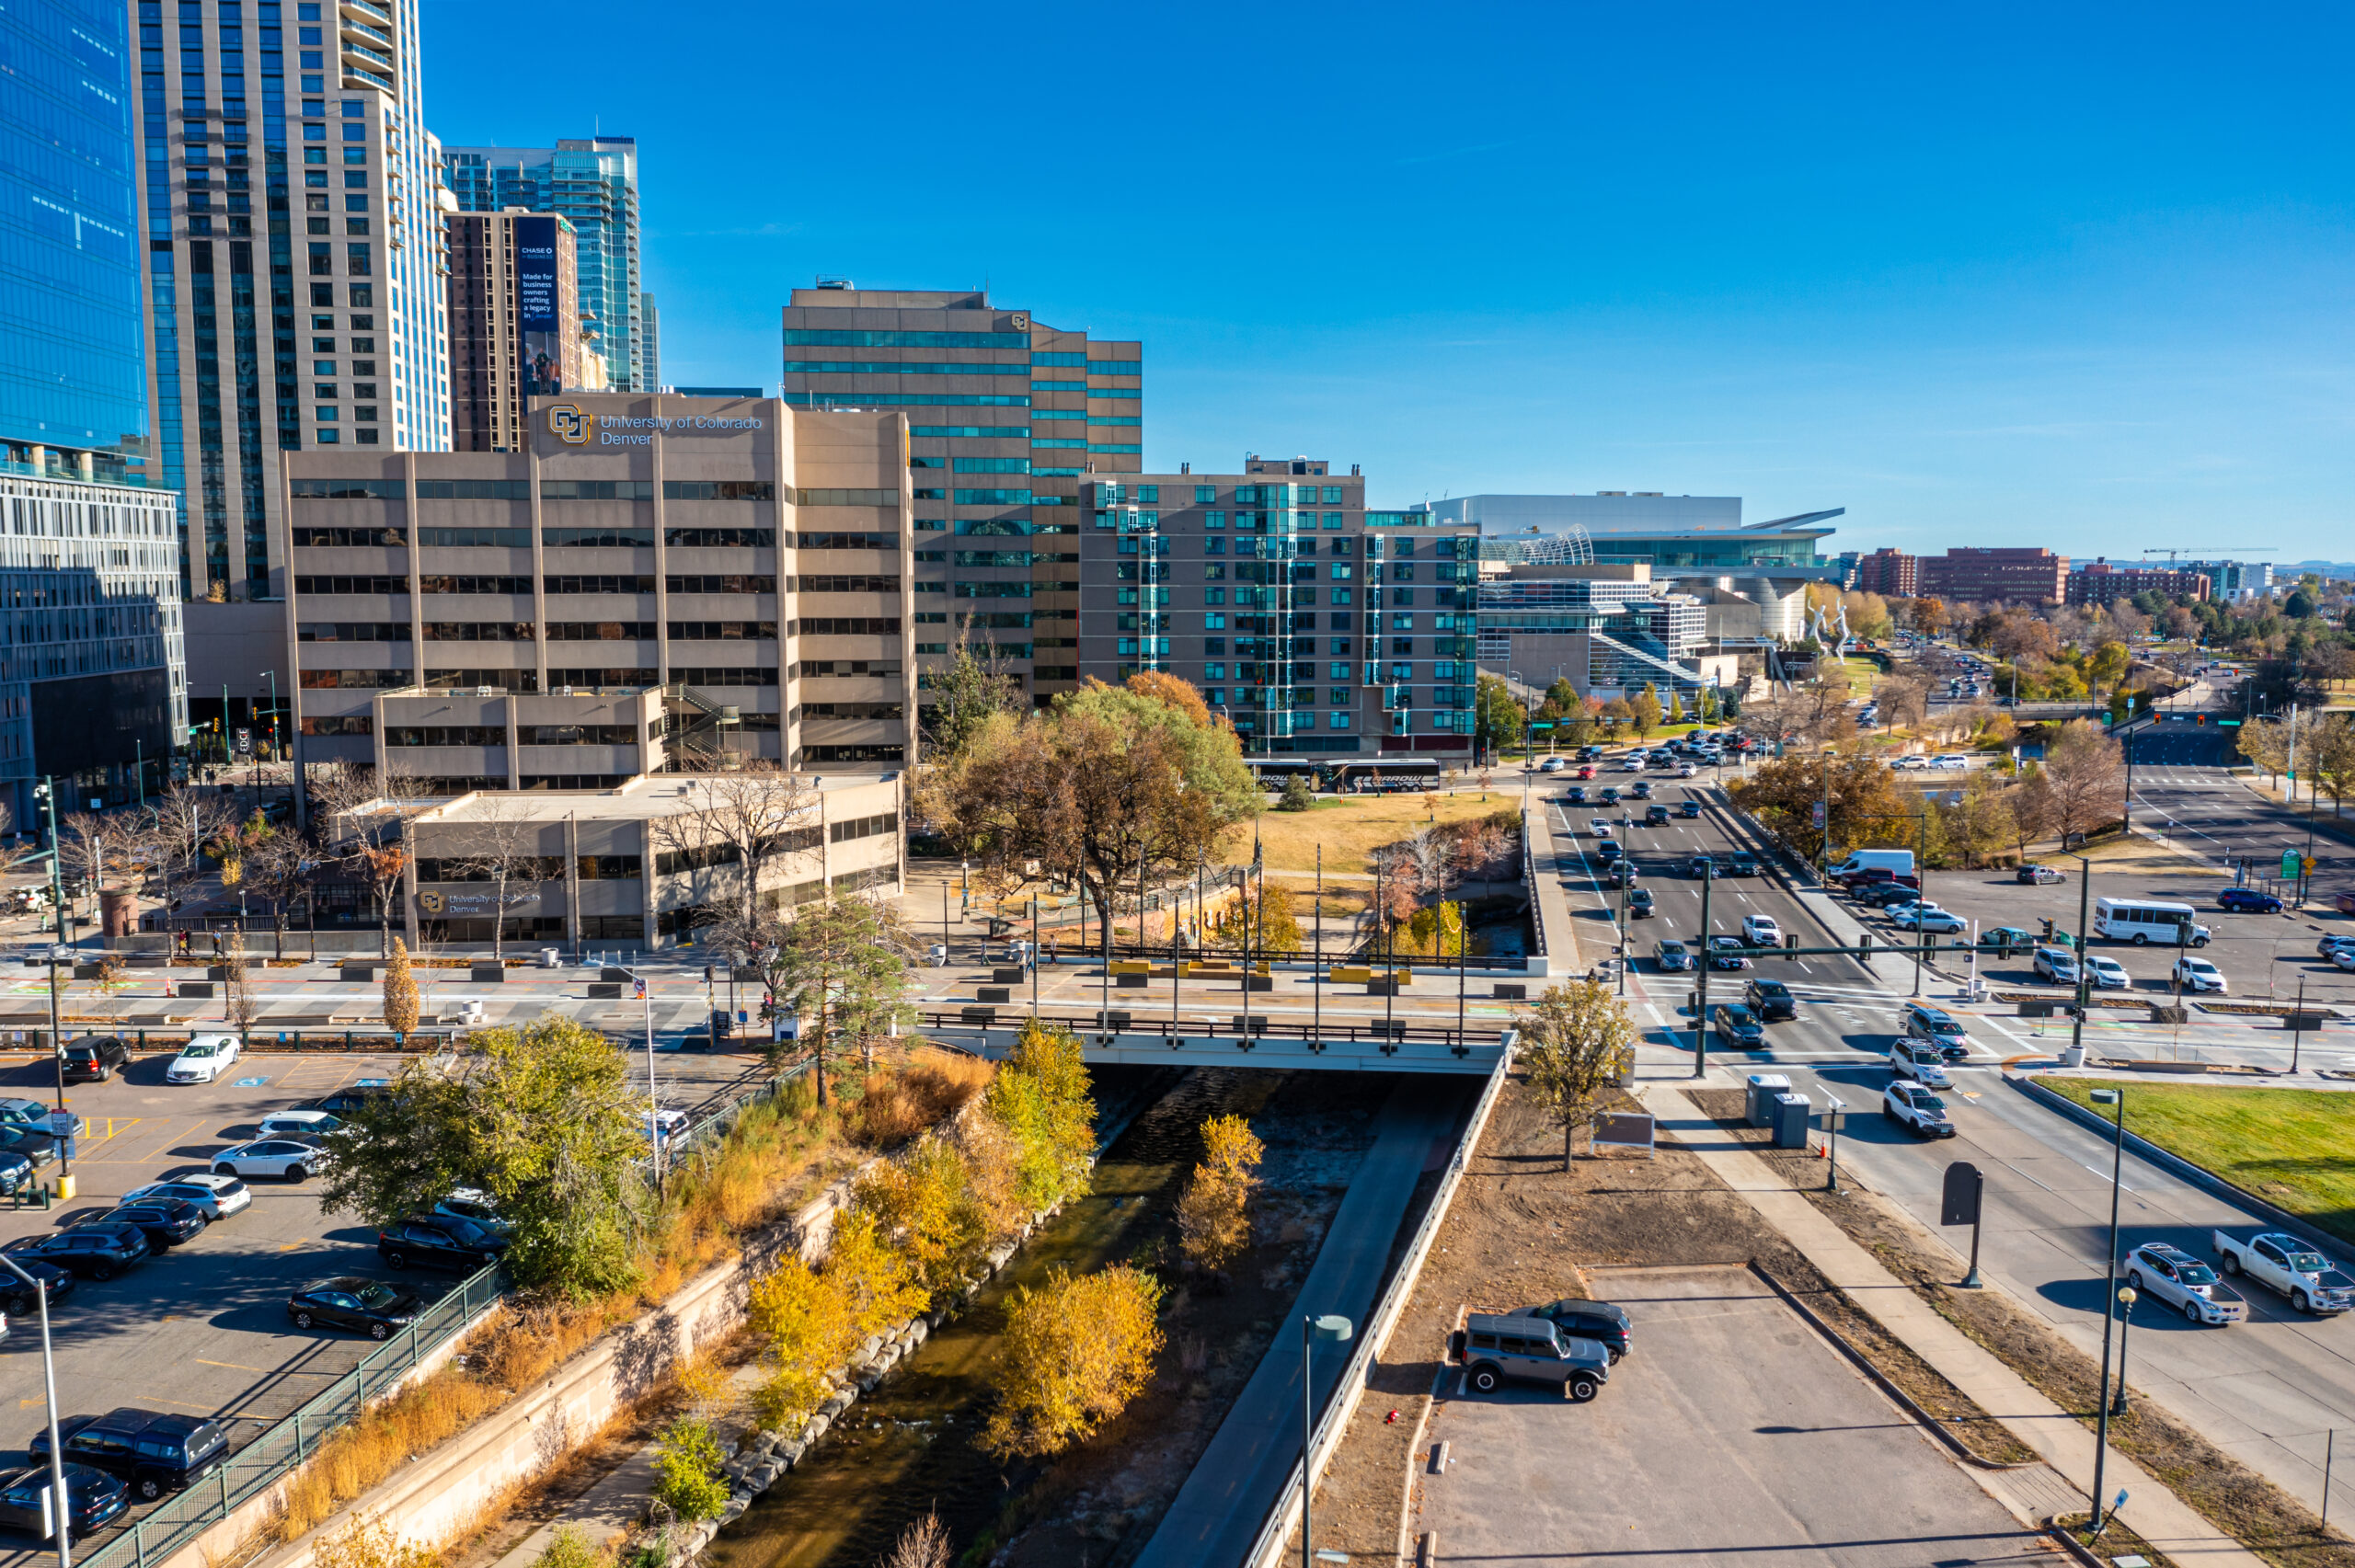 Wilson & Company designed a strong connection from the main campus to the downtown core, additional transit access, downtown bicycle lanes, and regional trail systems along Cherry Creek.  